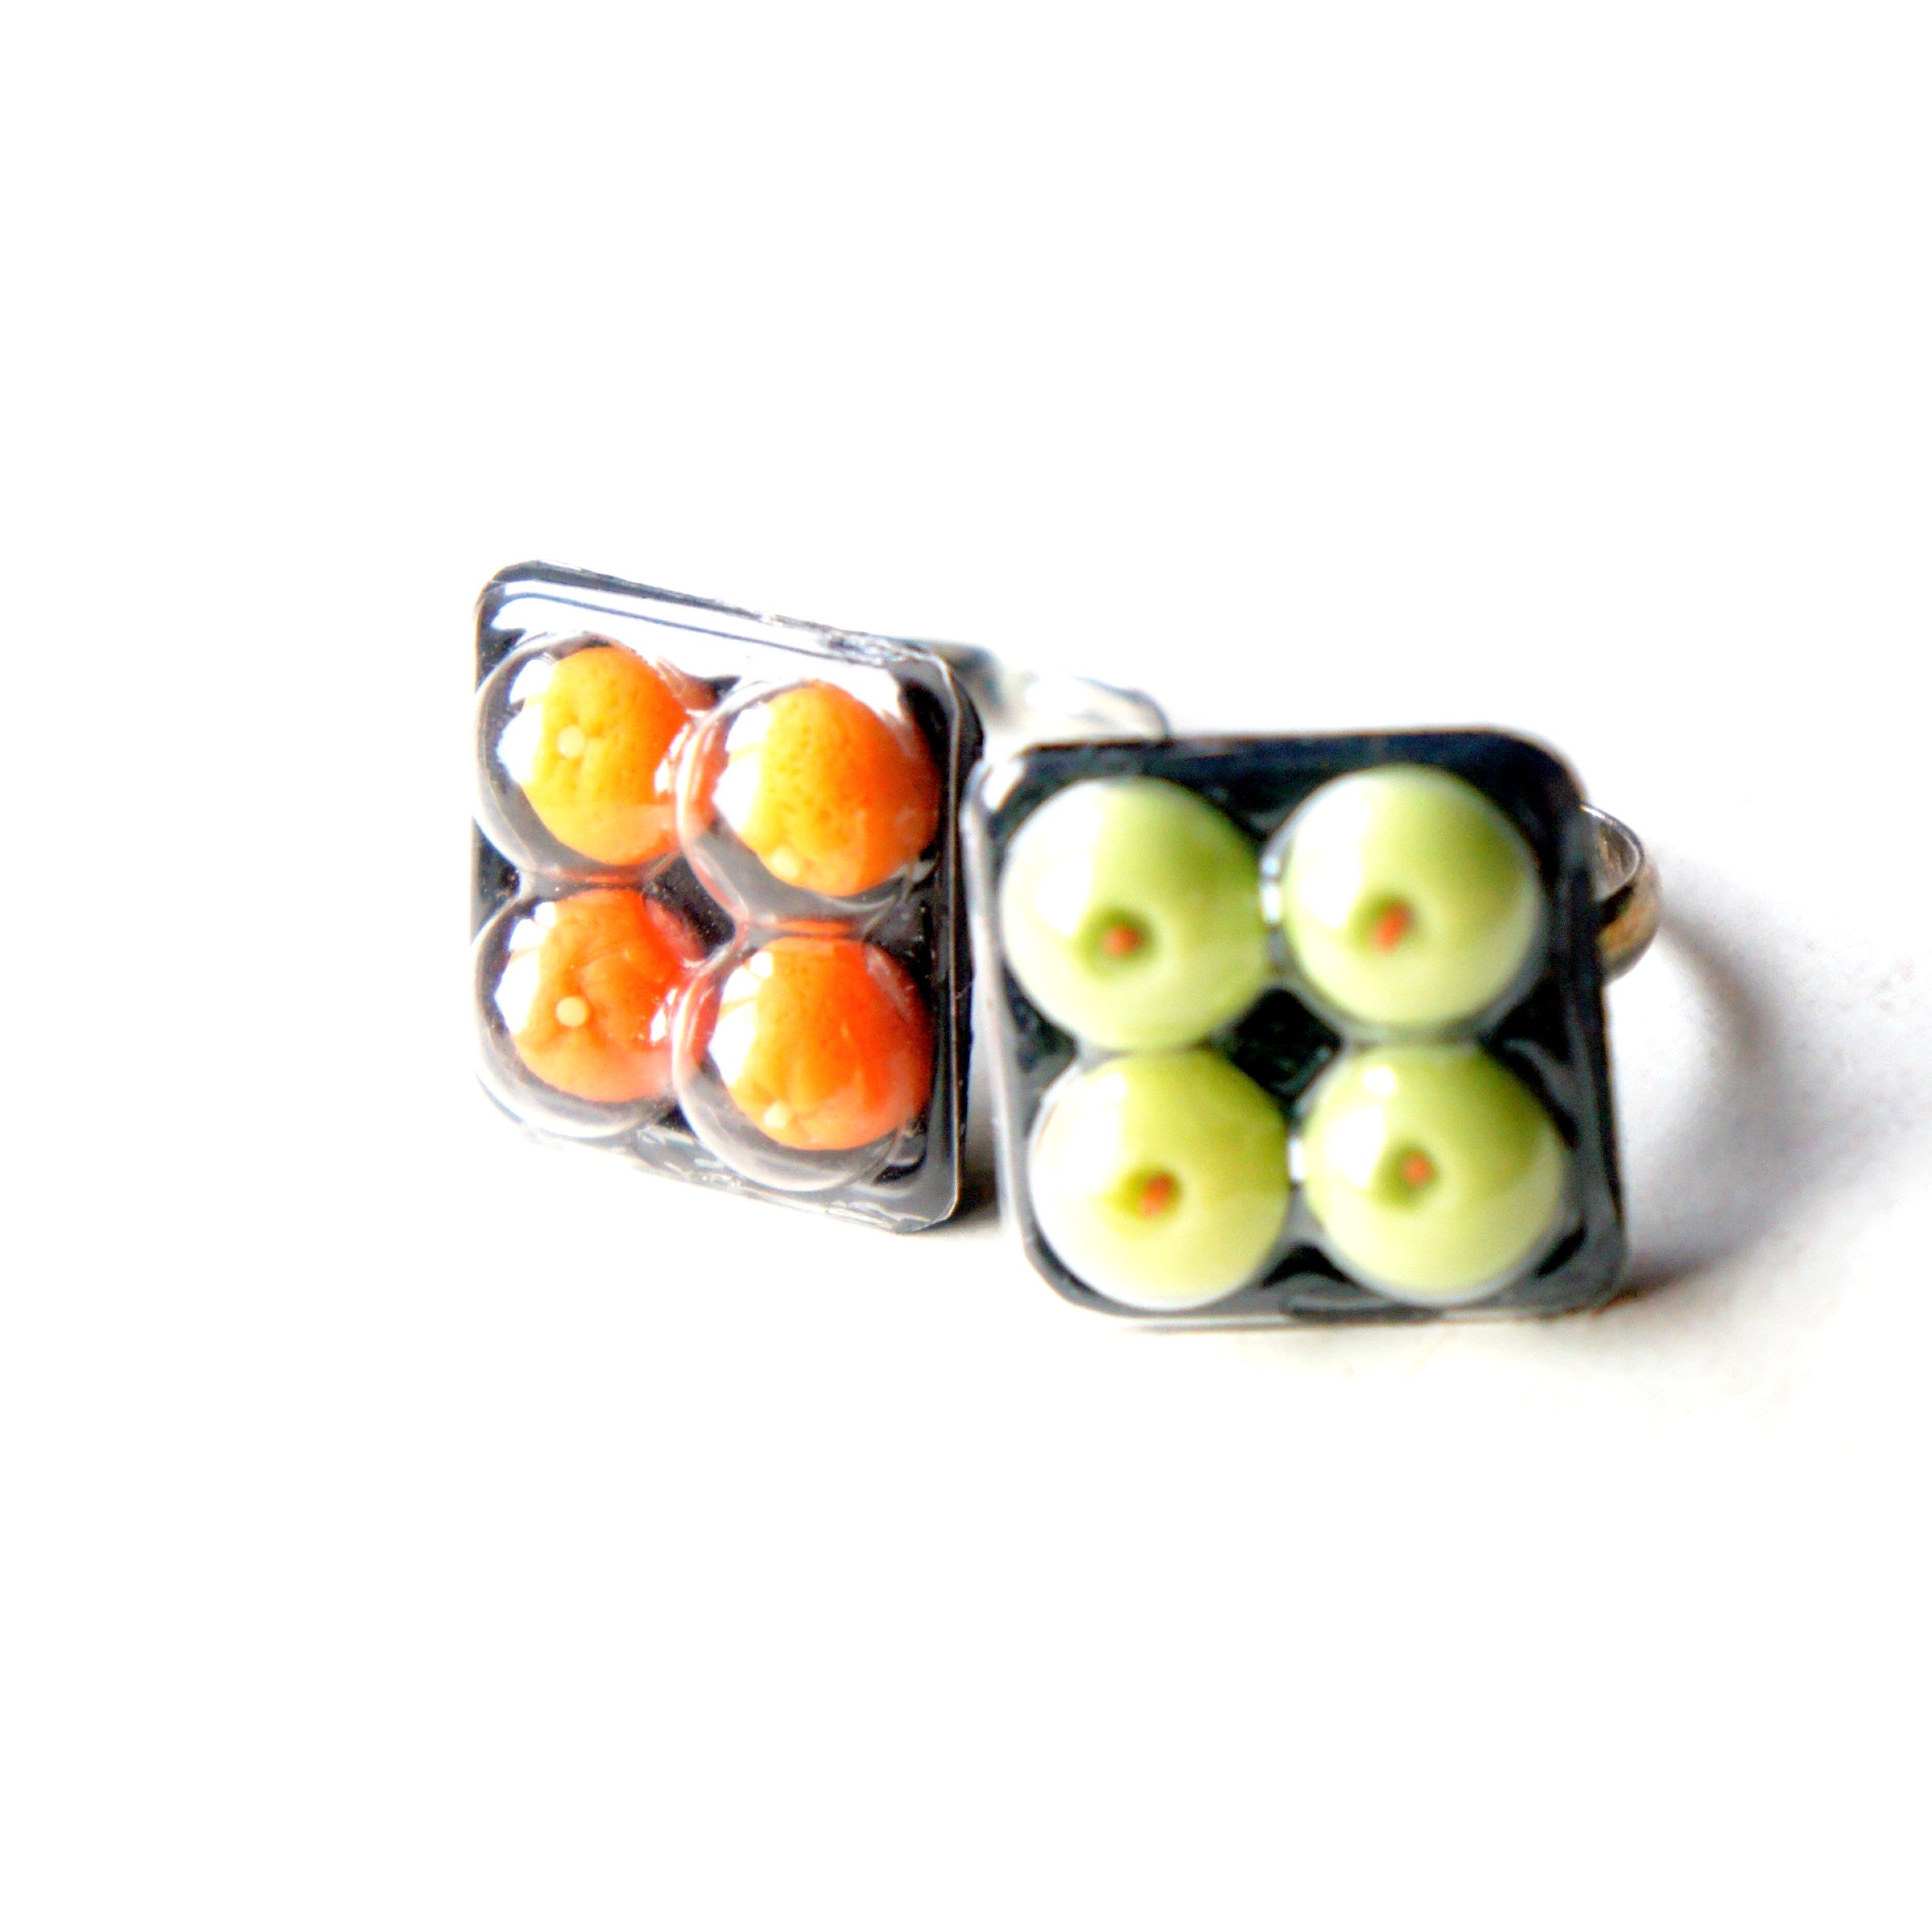 Orange Tray Ring - Jillicious charms and accessories